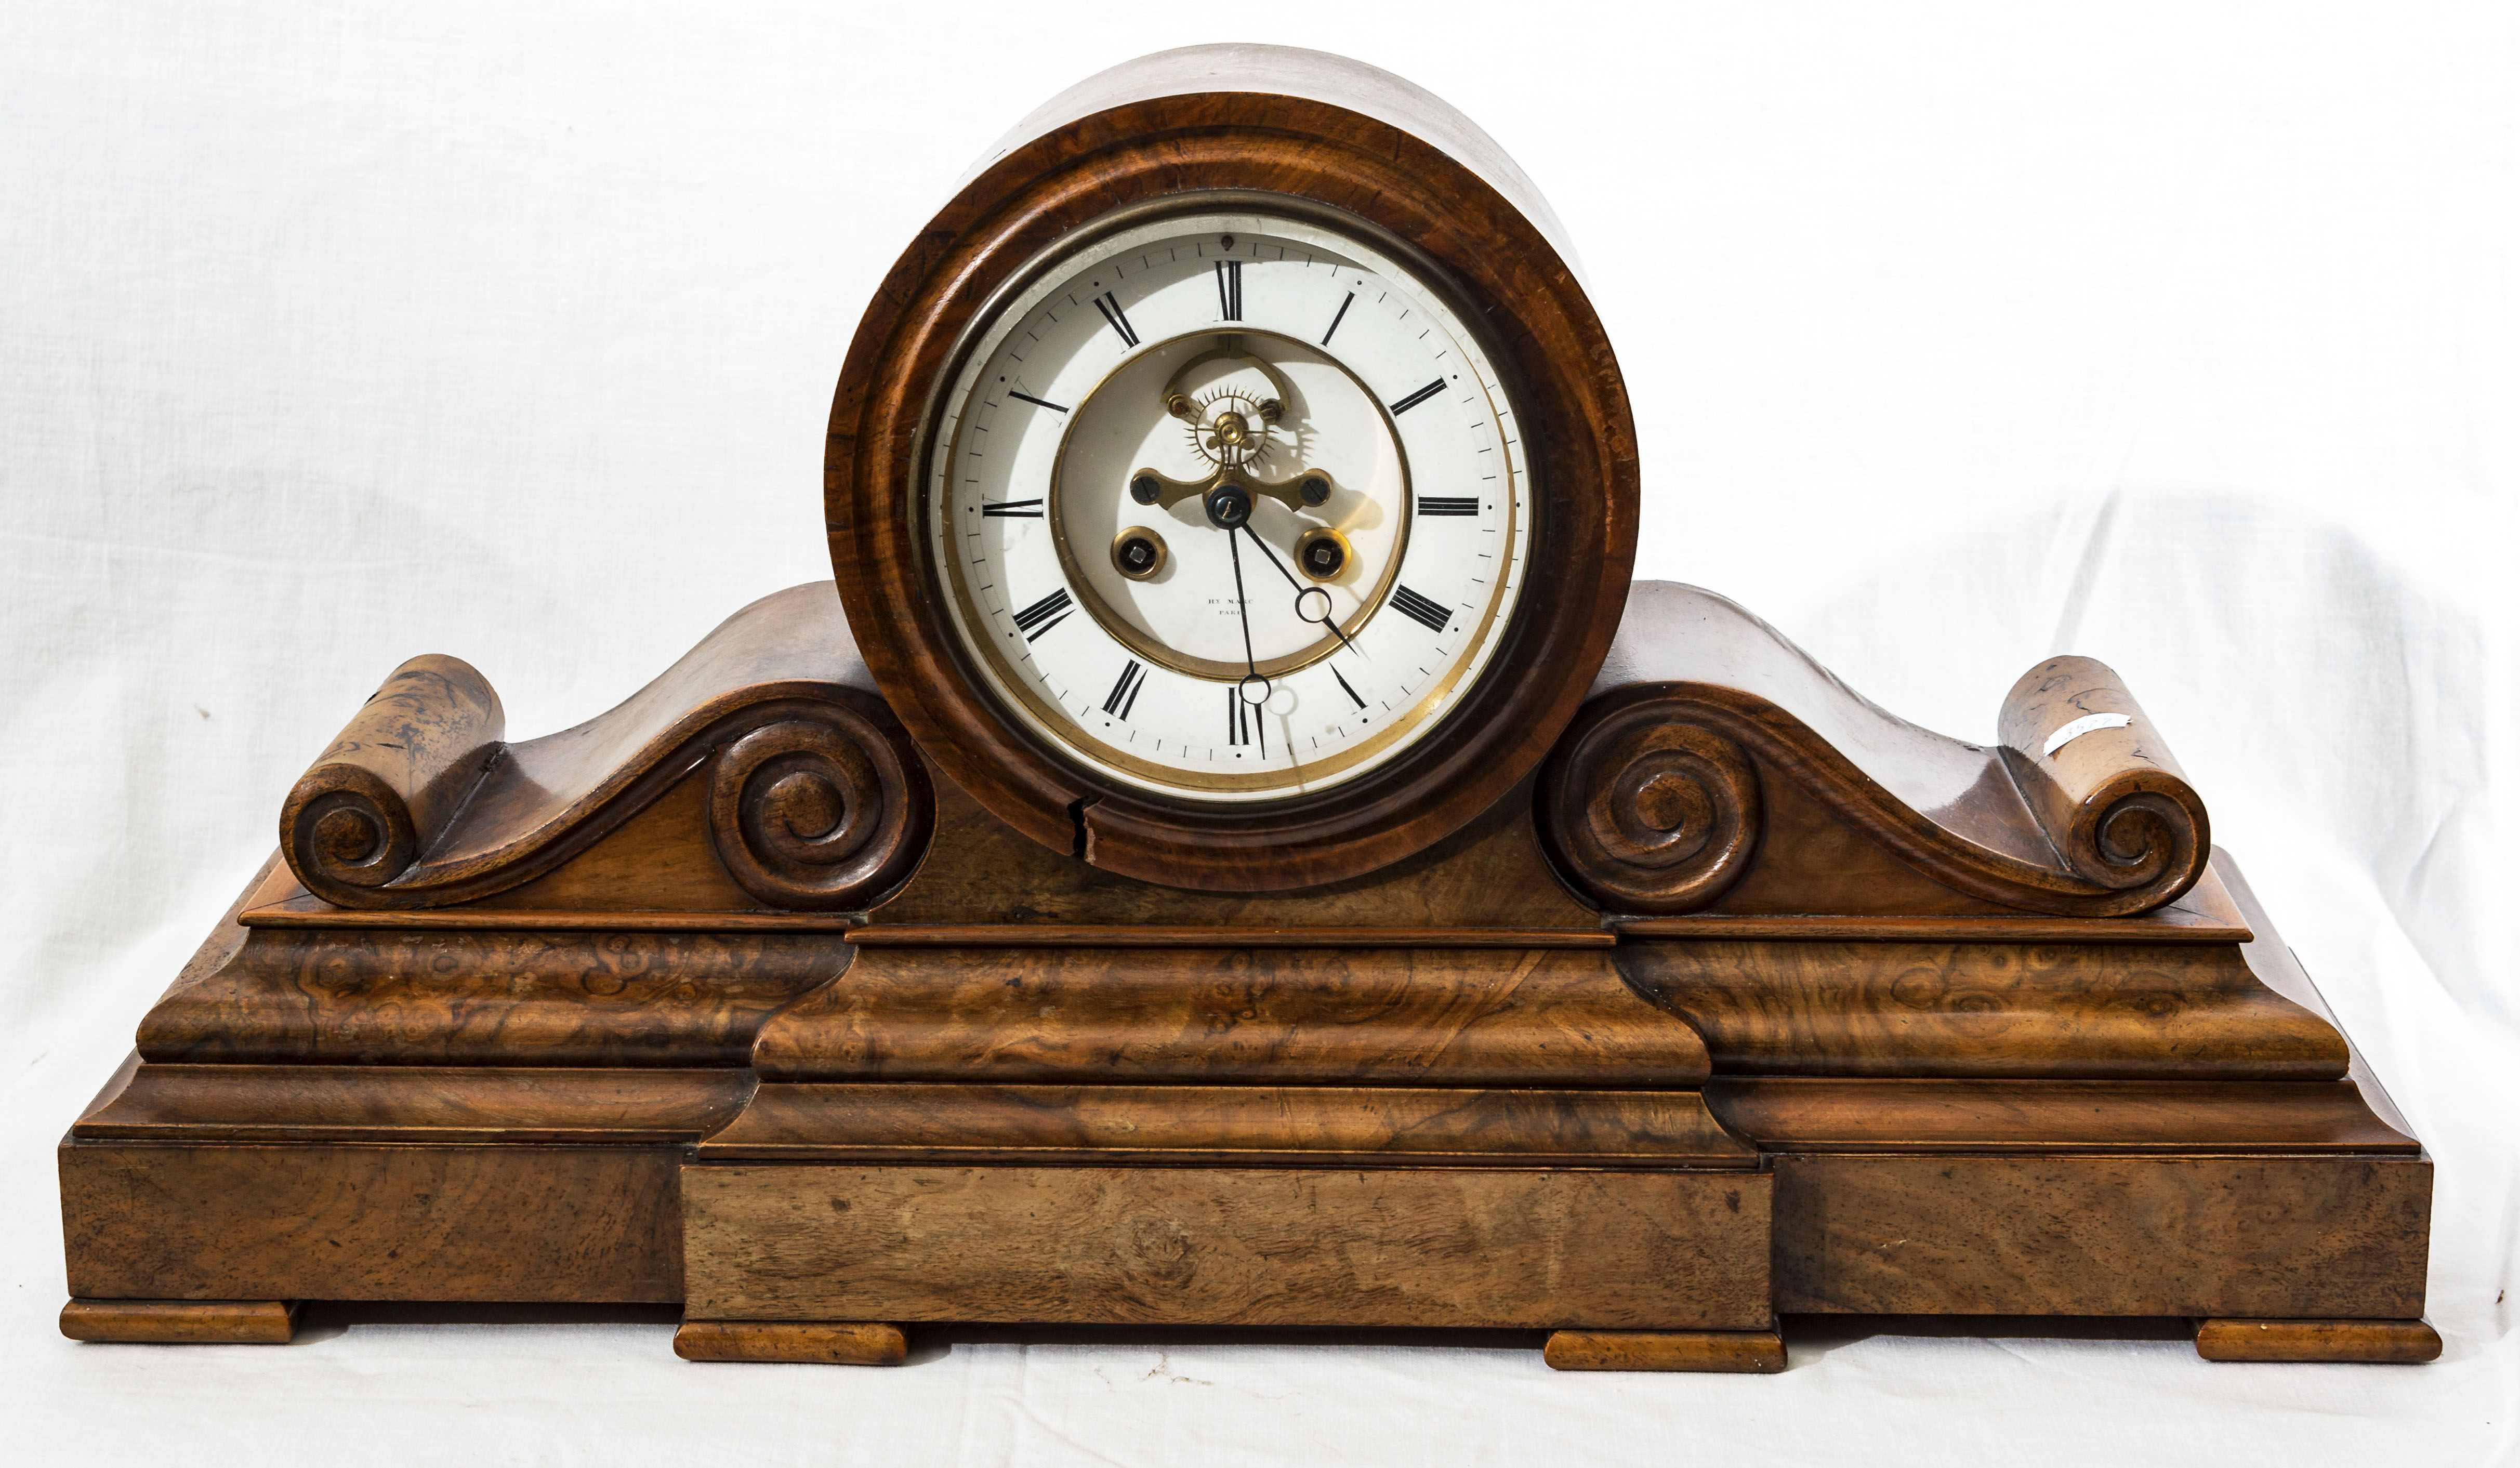 A Victorian burr walnut drumhead mantel clock with front escapement 8 day movement 21inch (53cm)